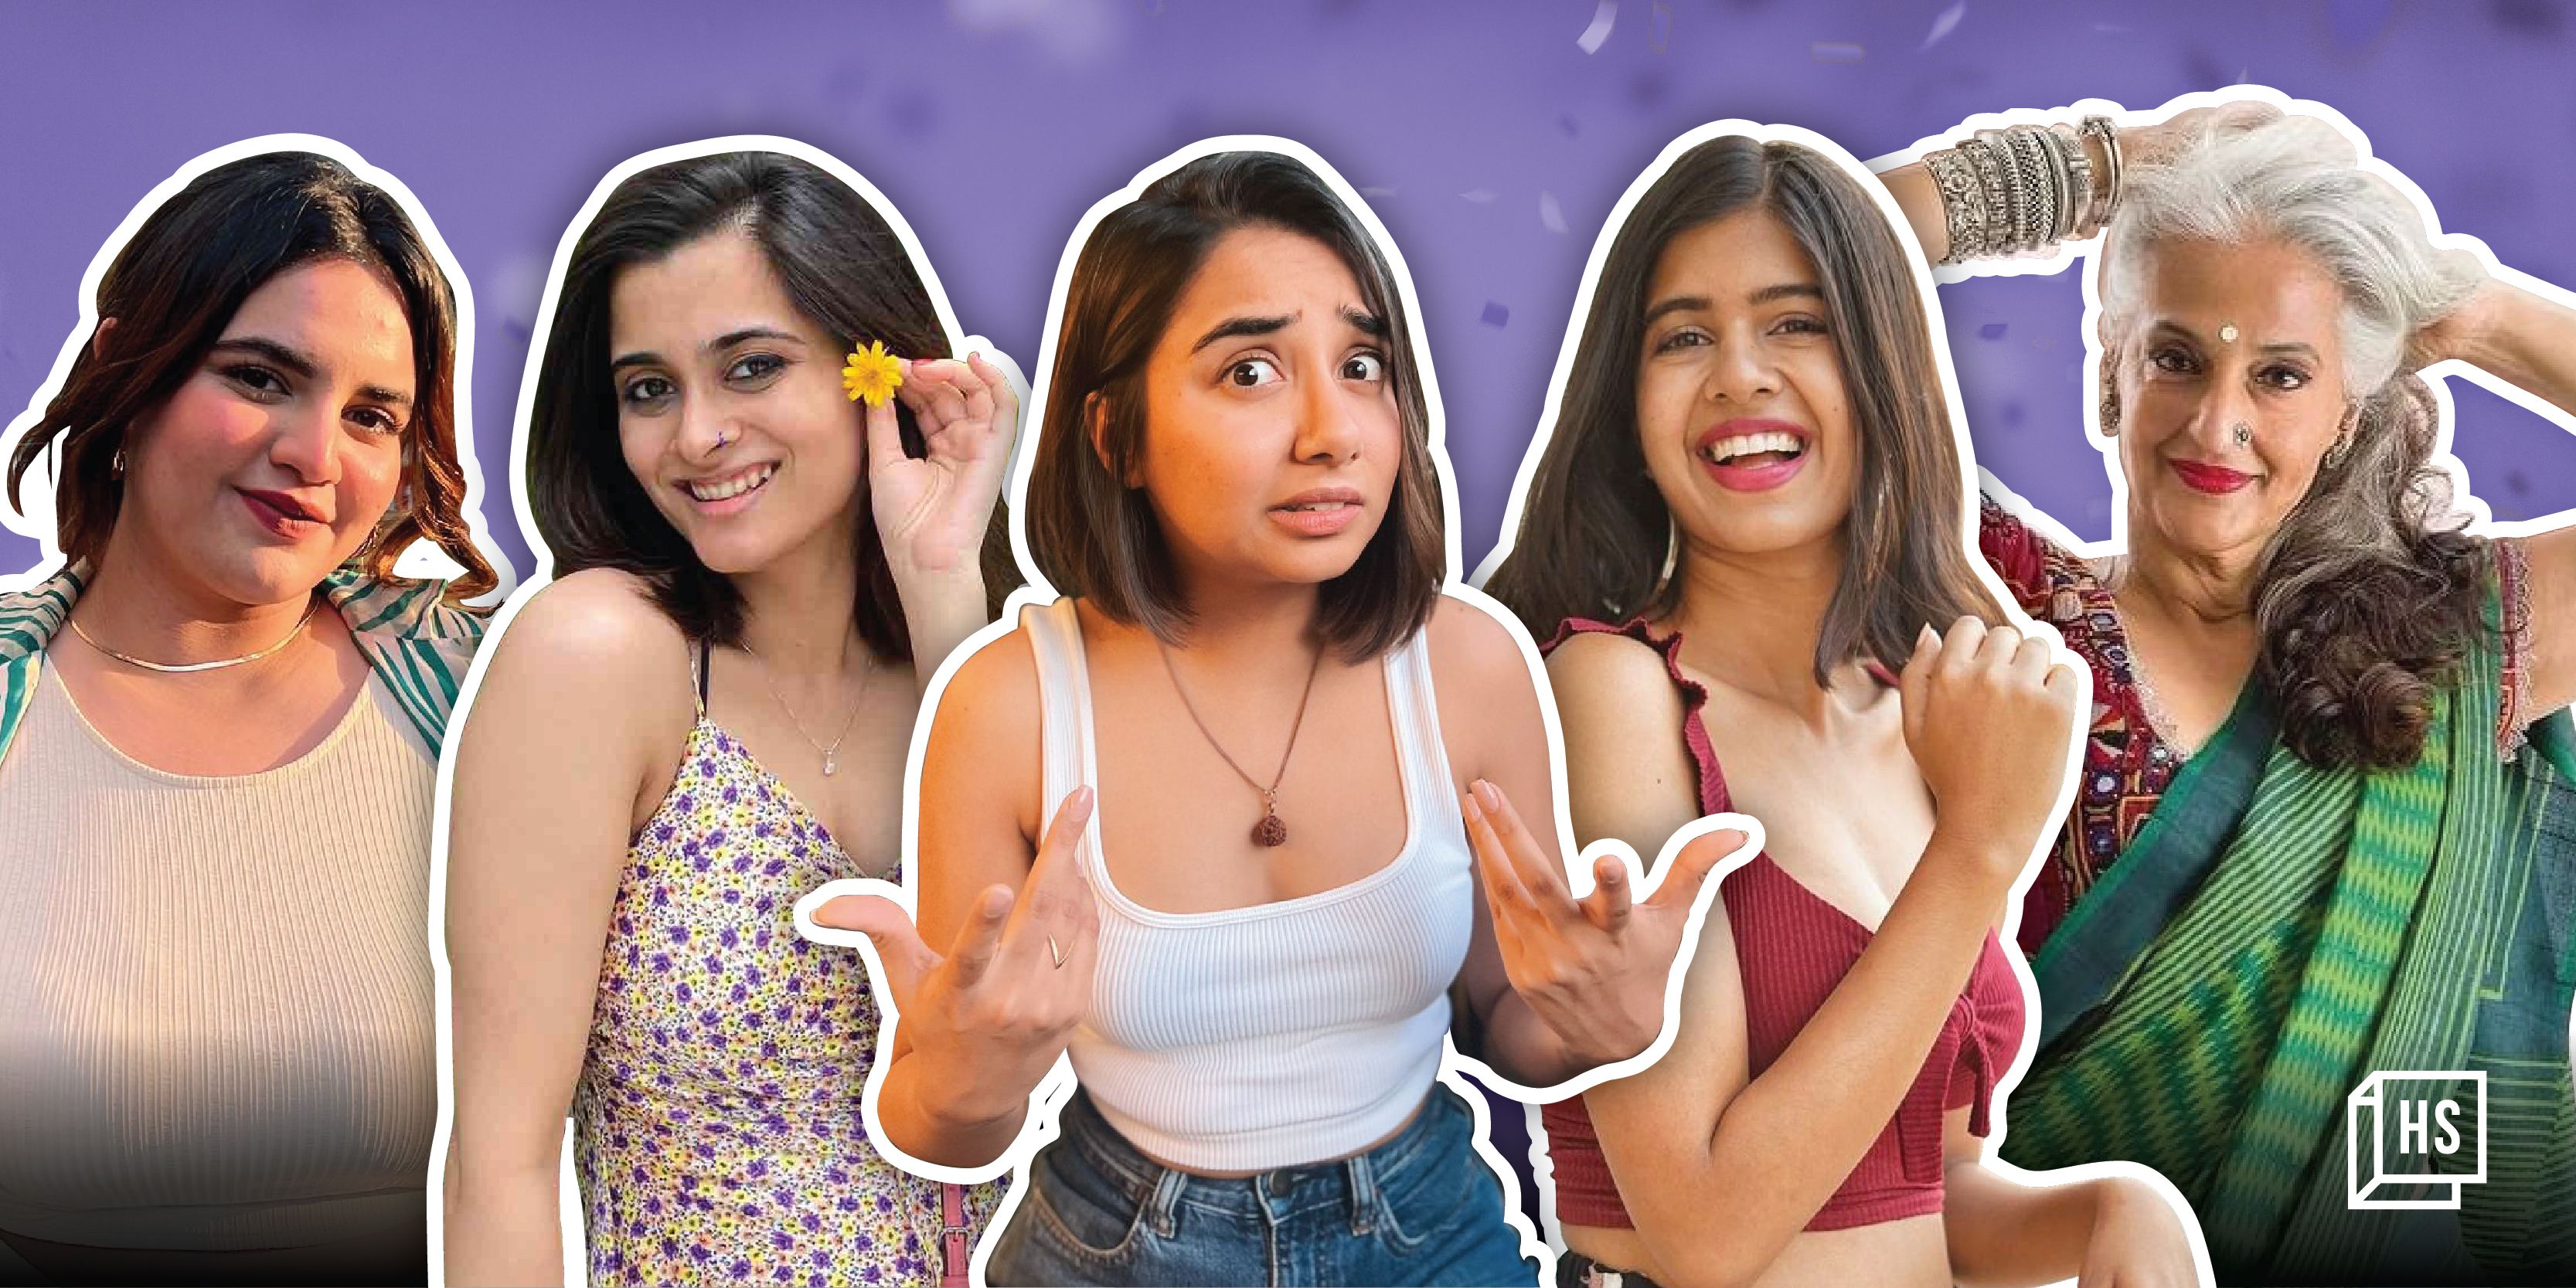 Meet 5 women influencers who are combining viral content with strong messages

